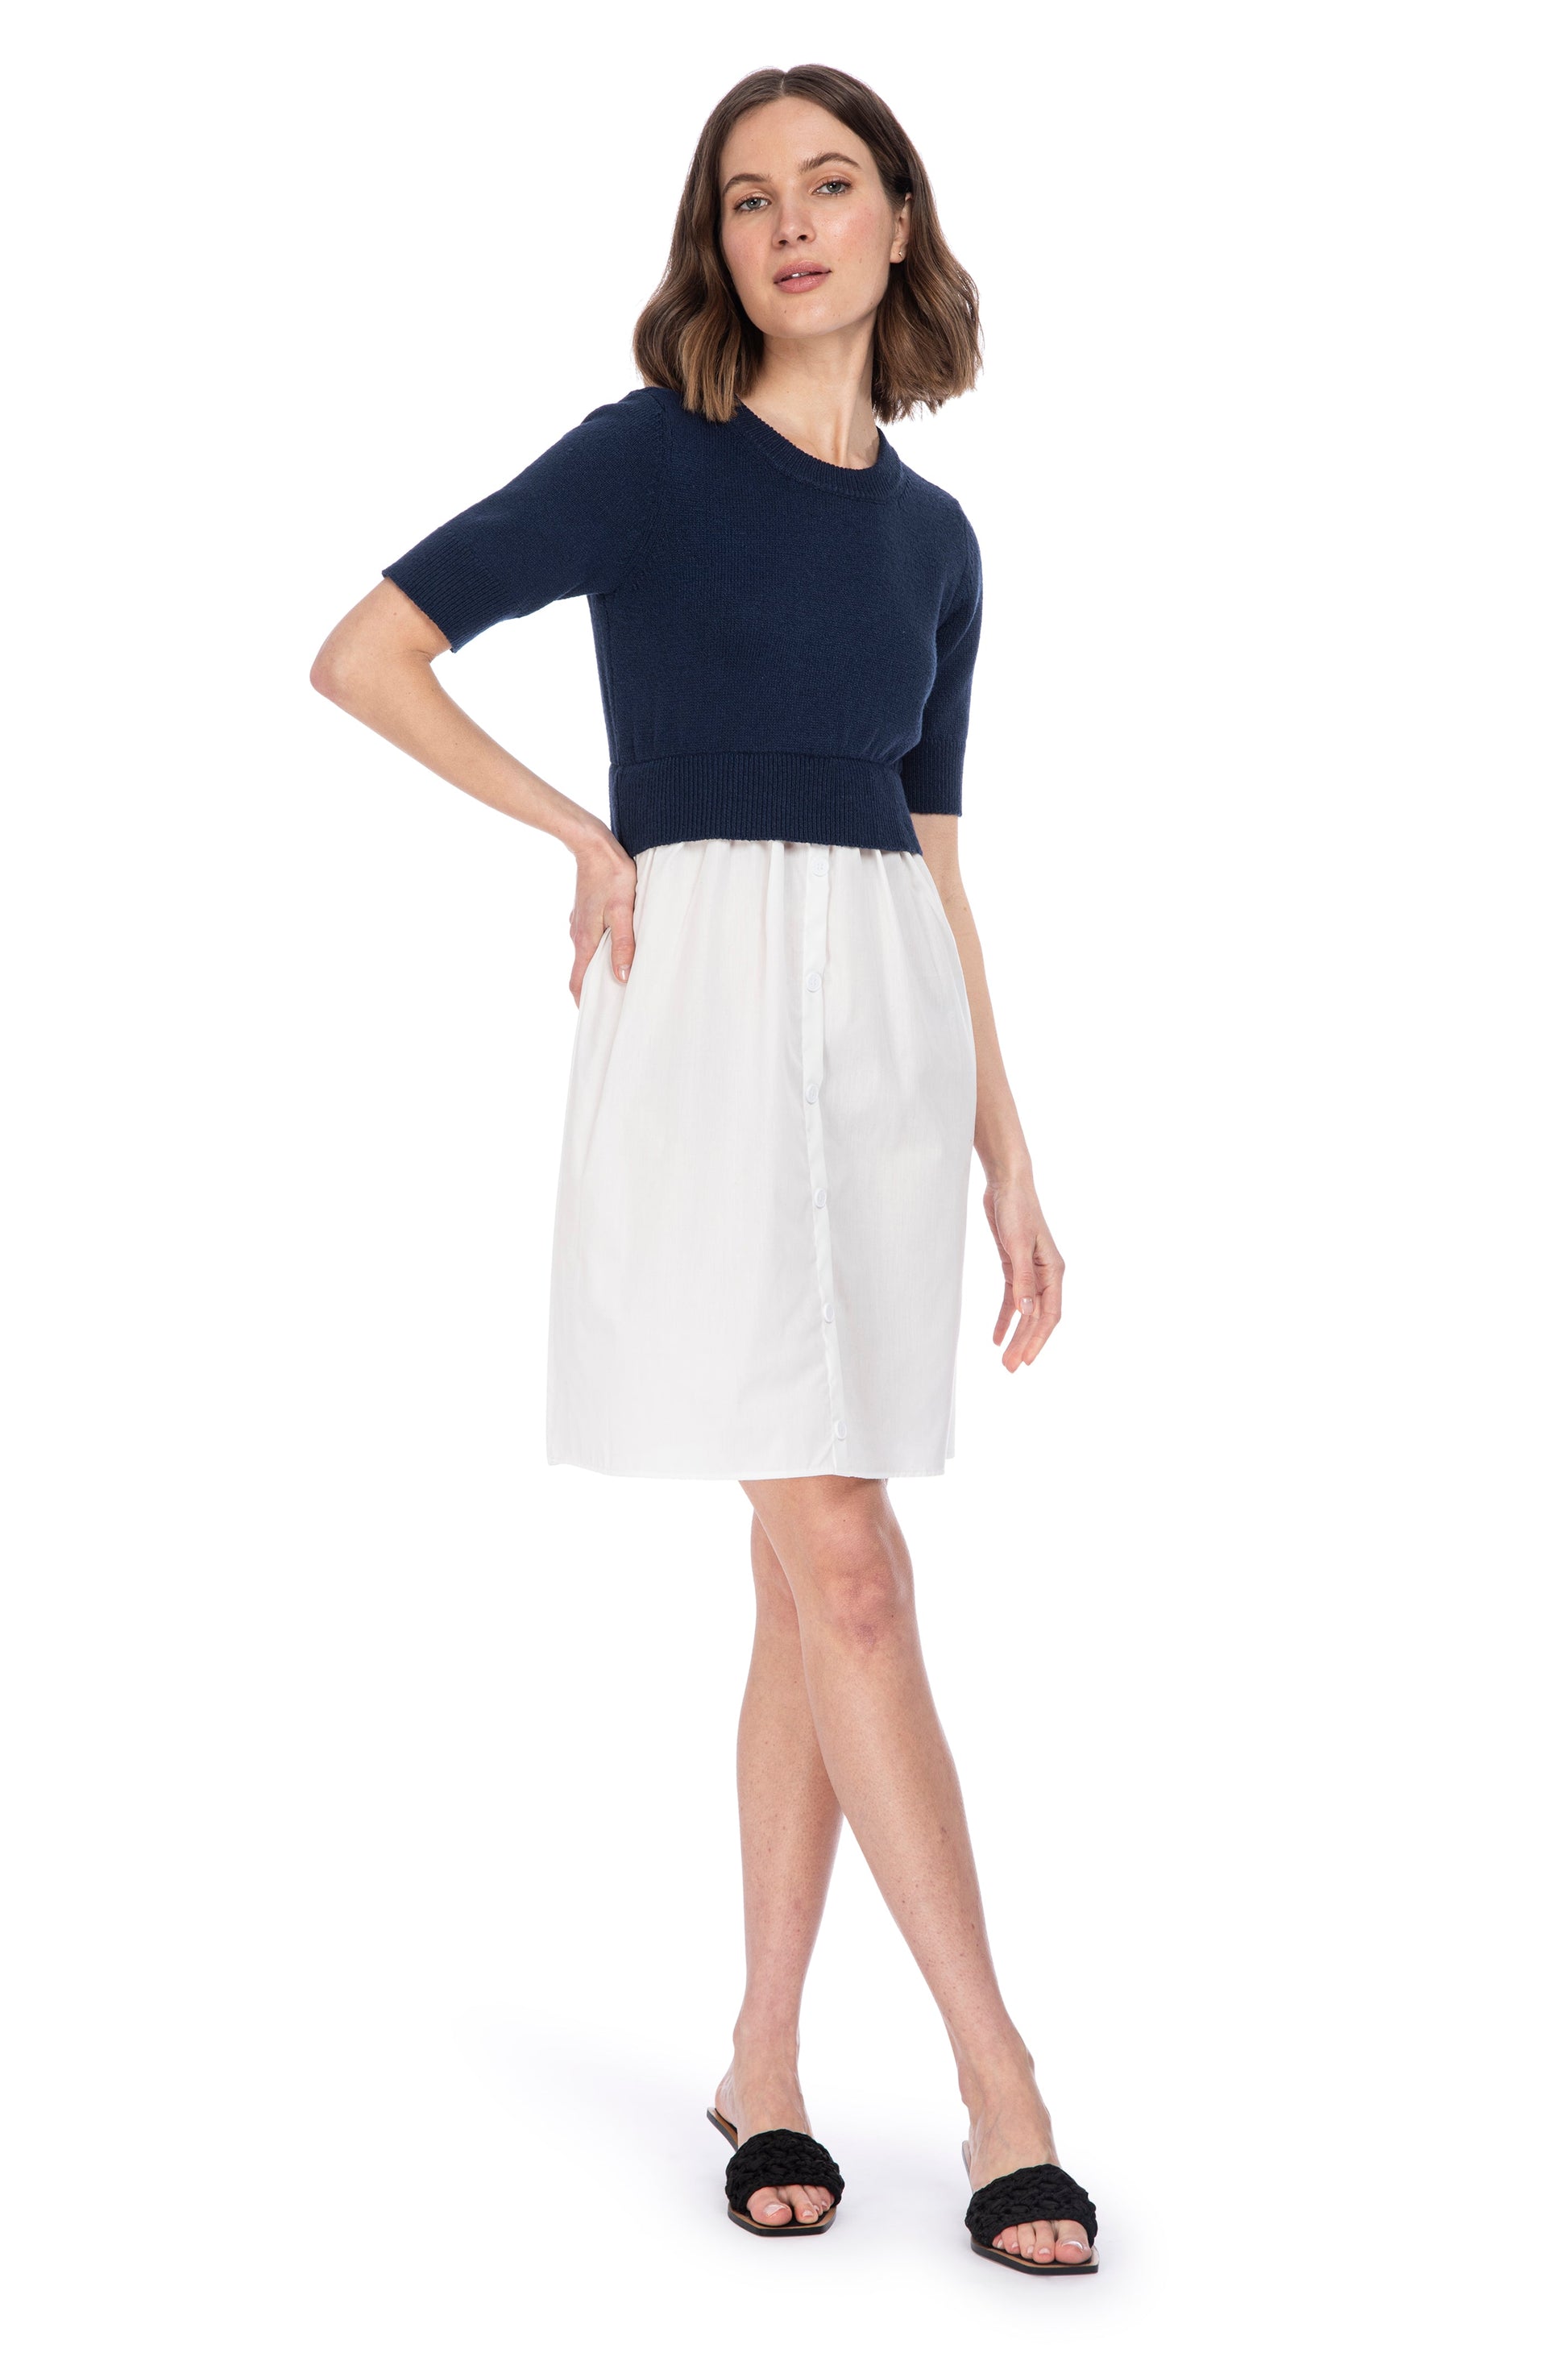 A woman modeling a casual SS Mixed Media Dress by B Collection by Bobeau with a navy blue top and a white poplin skirt, paired with simple black sandals.